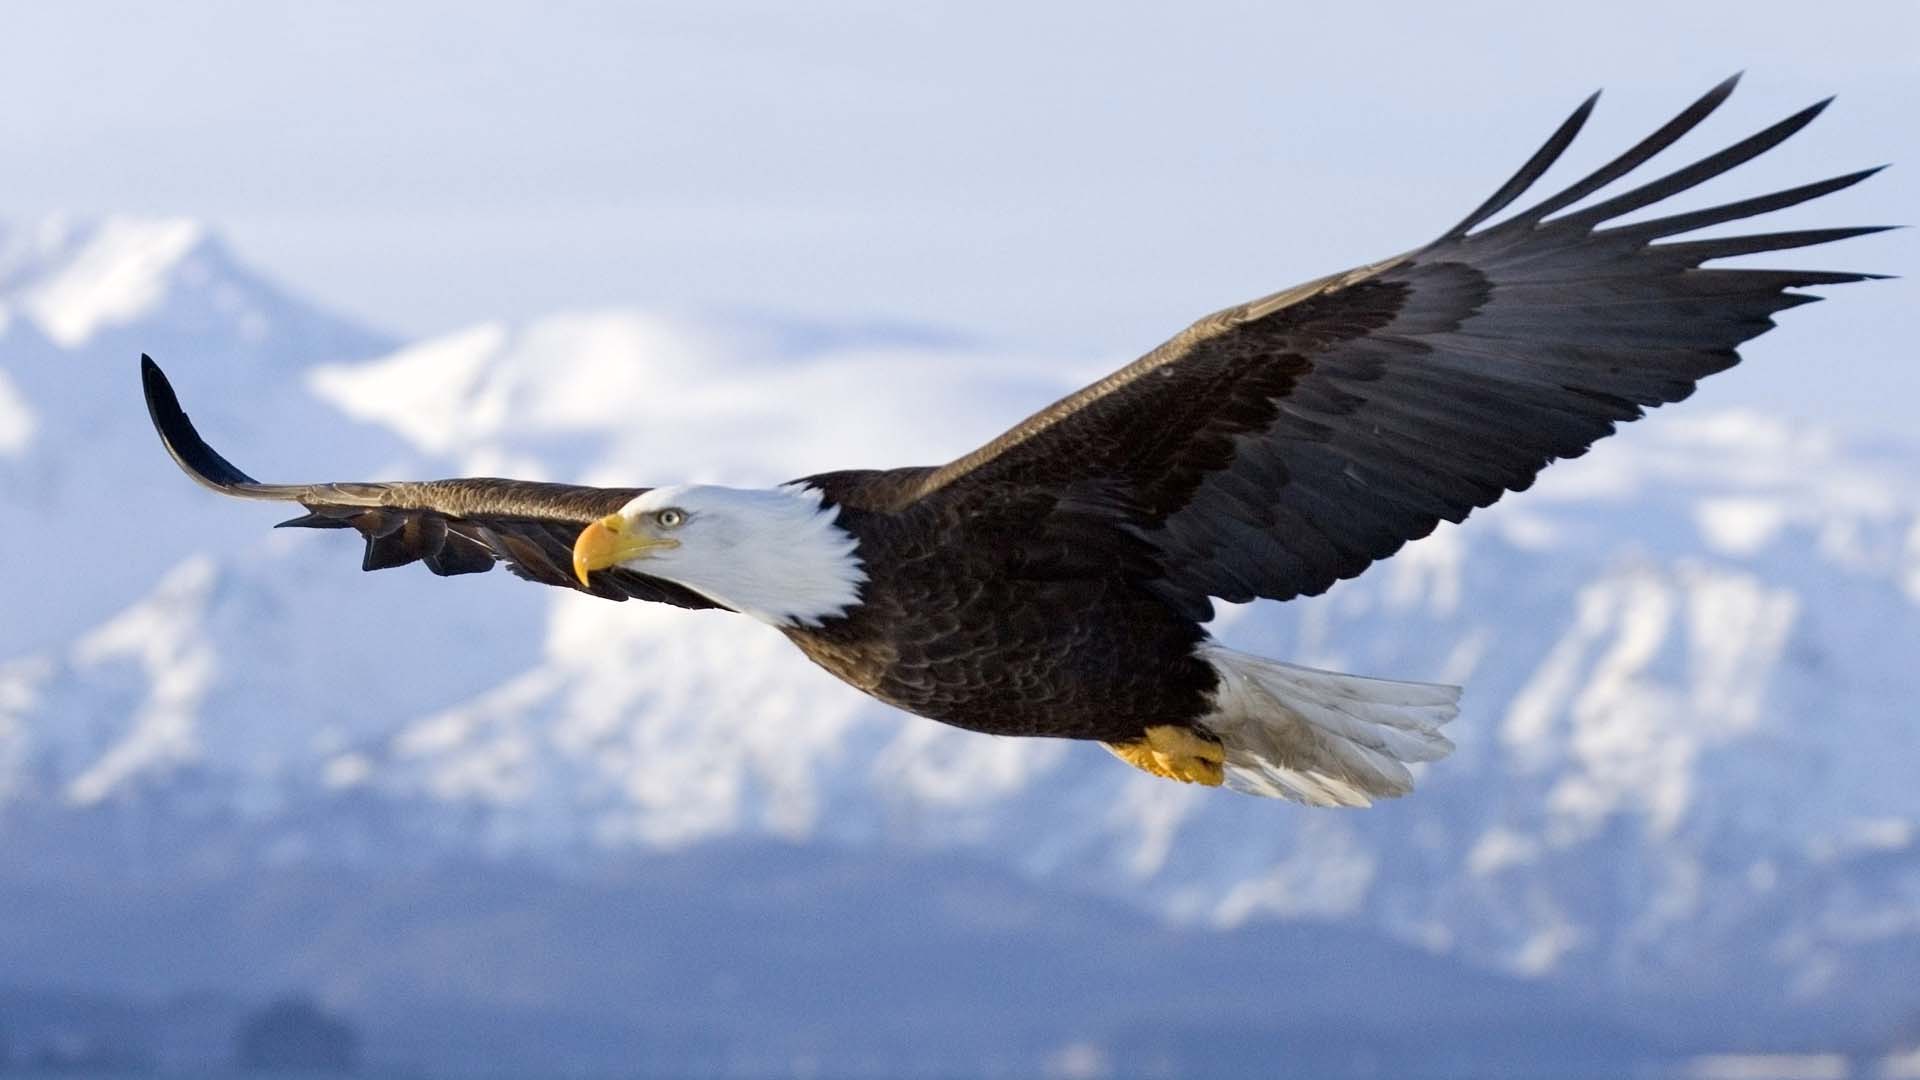 Eagle Symbol Of Nature Latest HD Wallpaper Free Download. HD